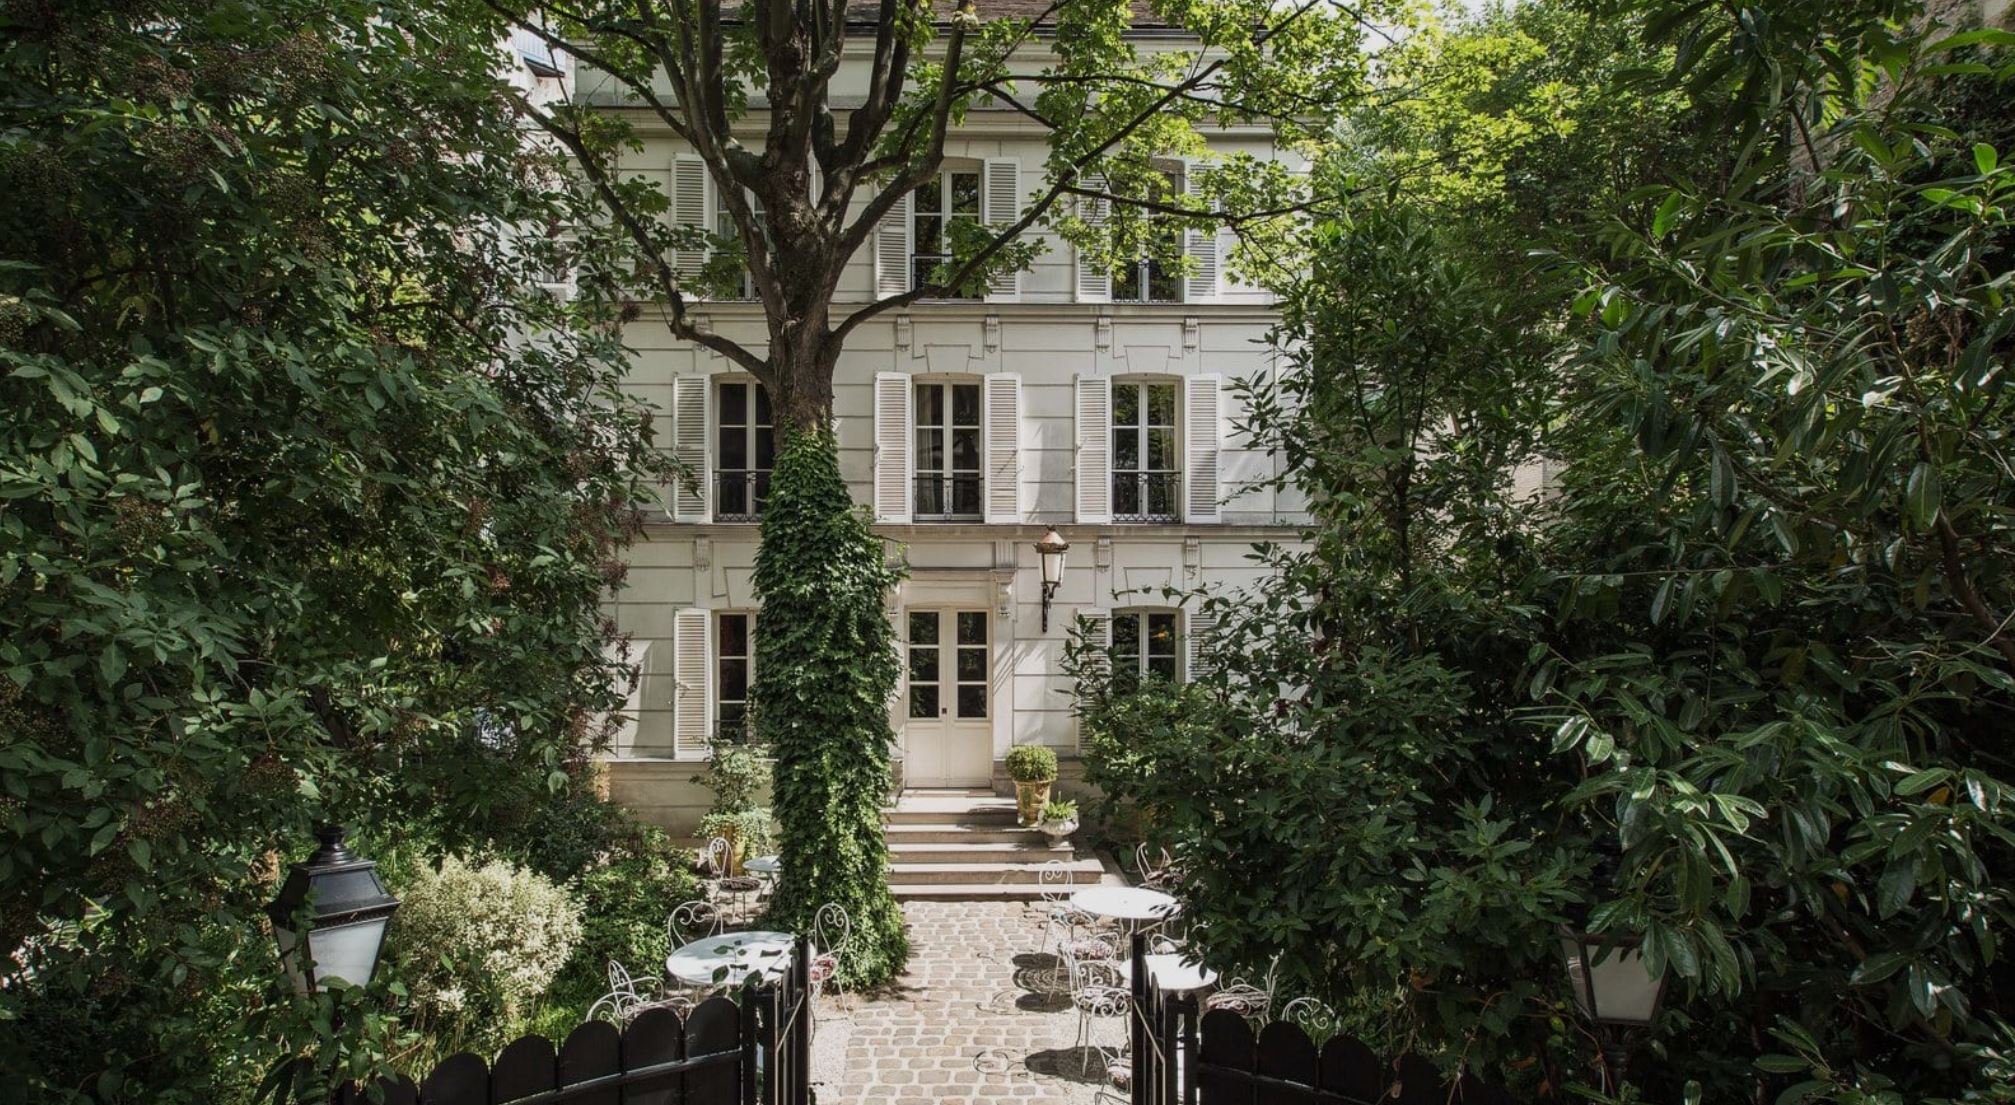 L’hotel Particulier: the jewel of Montmartre